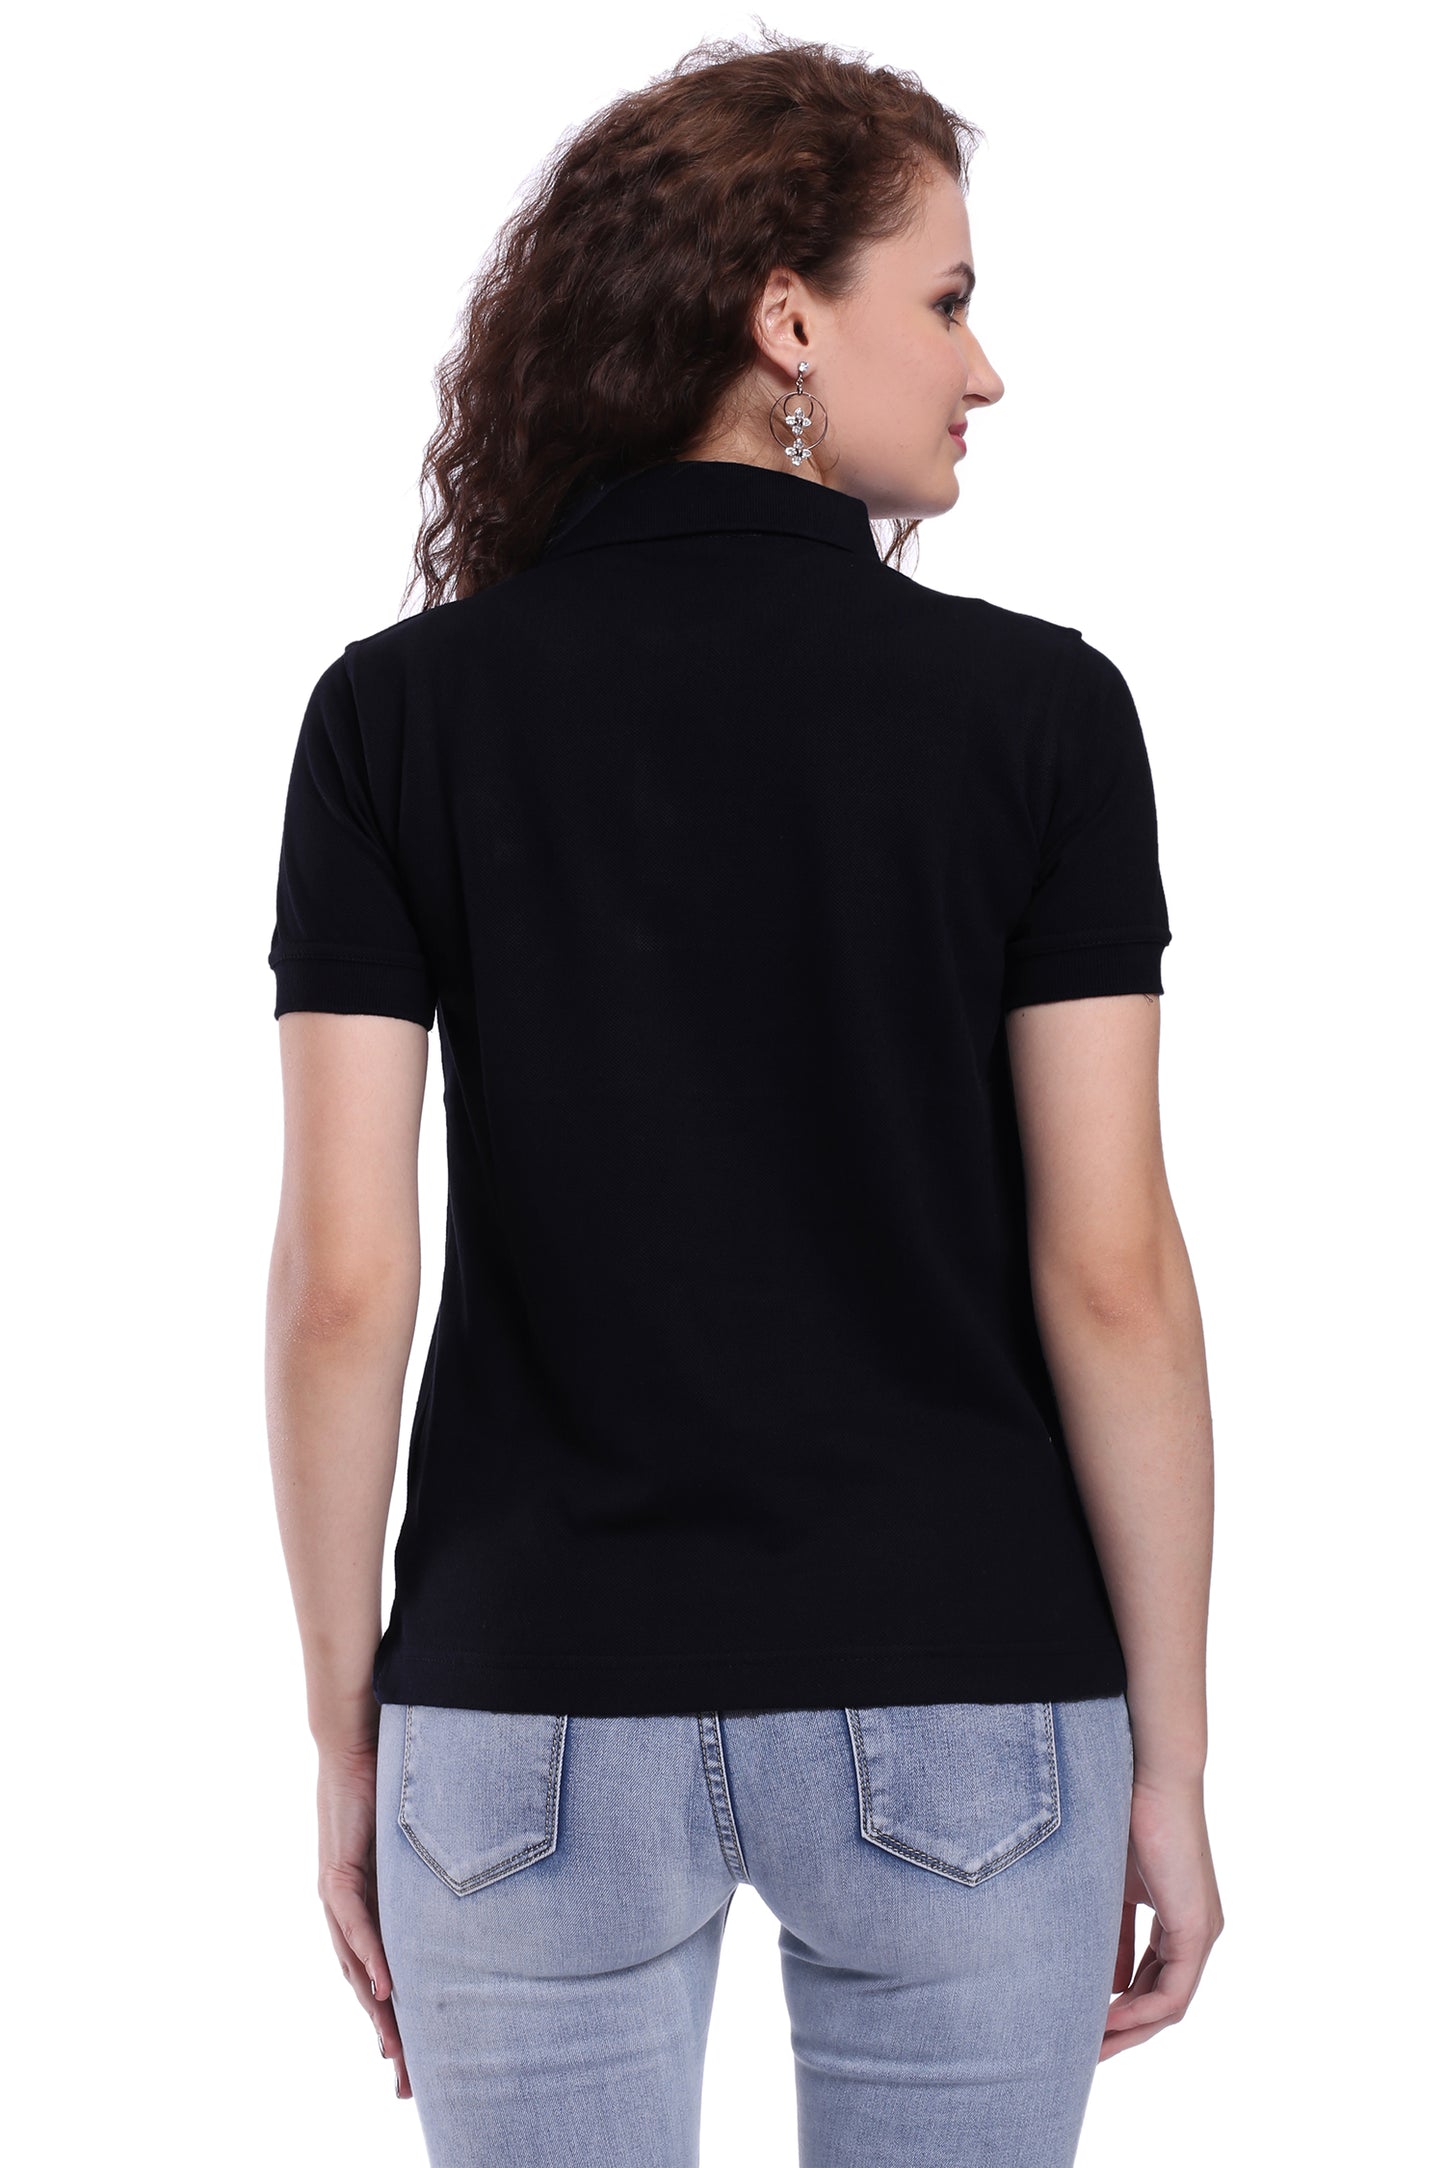 Unisex T-shirts (with collar)